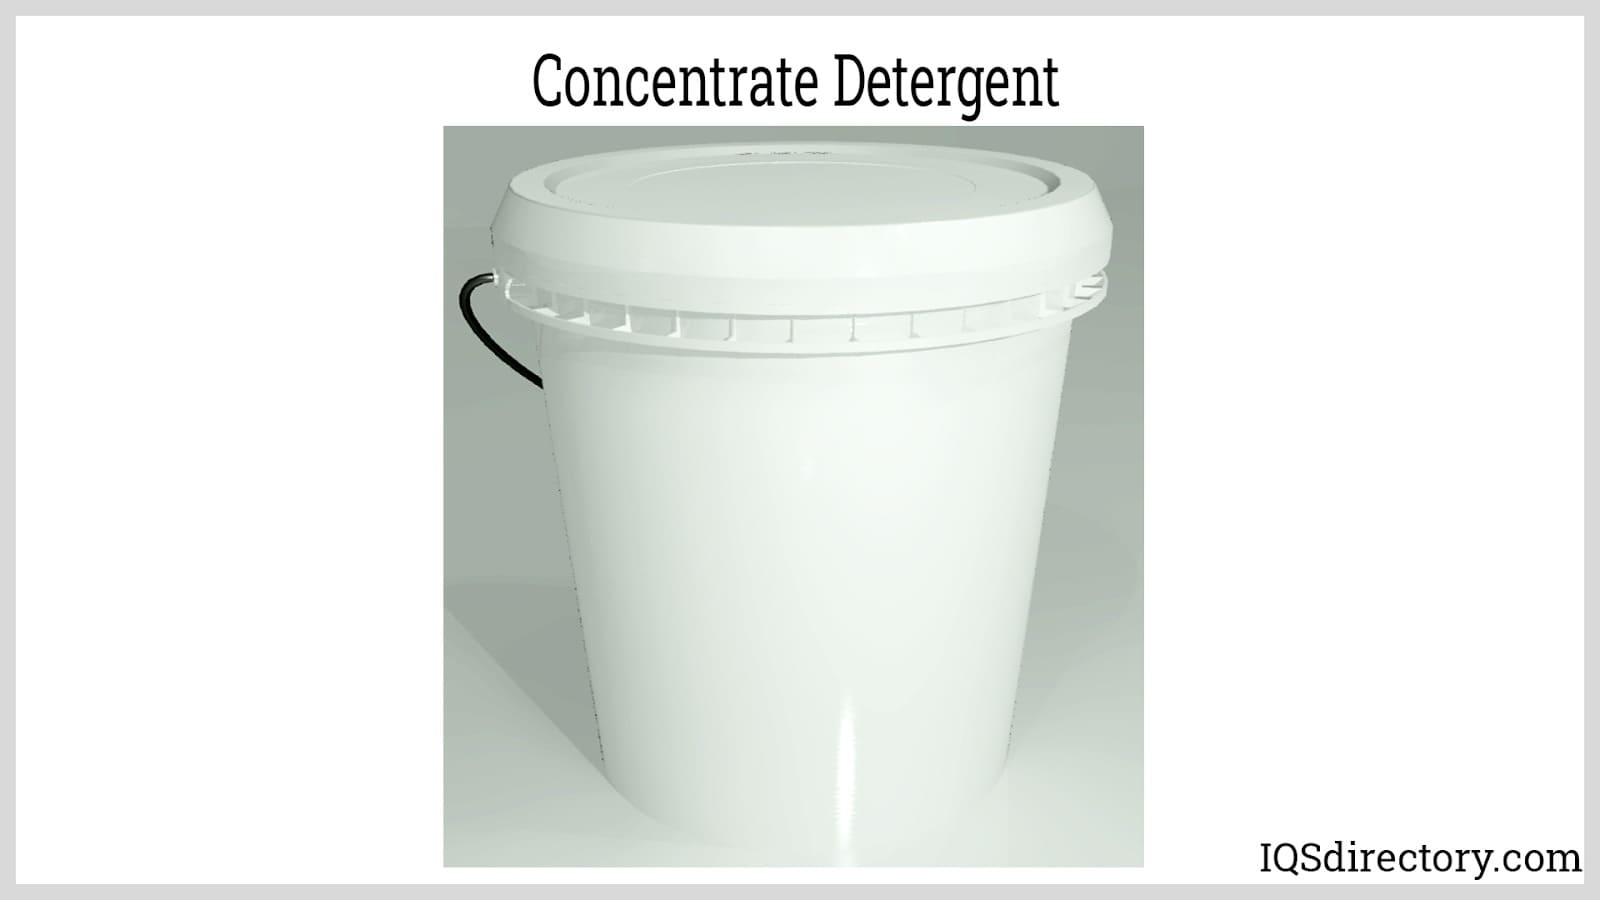 Concentrate Detergent